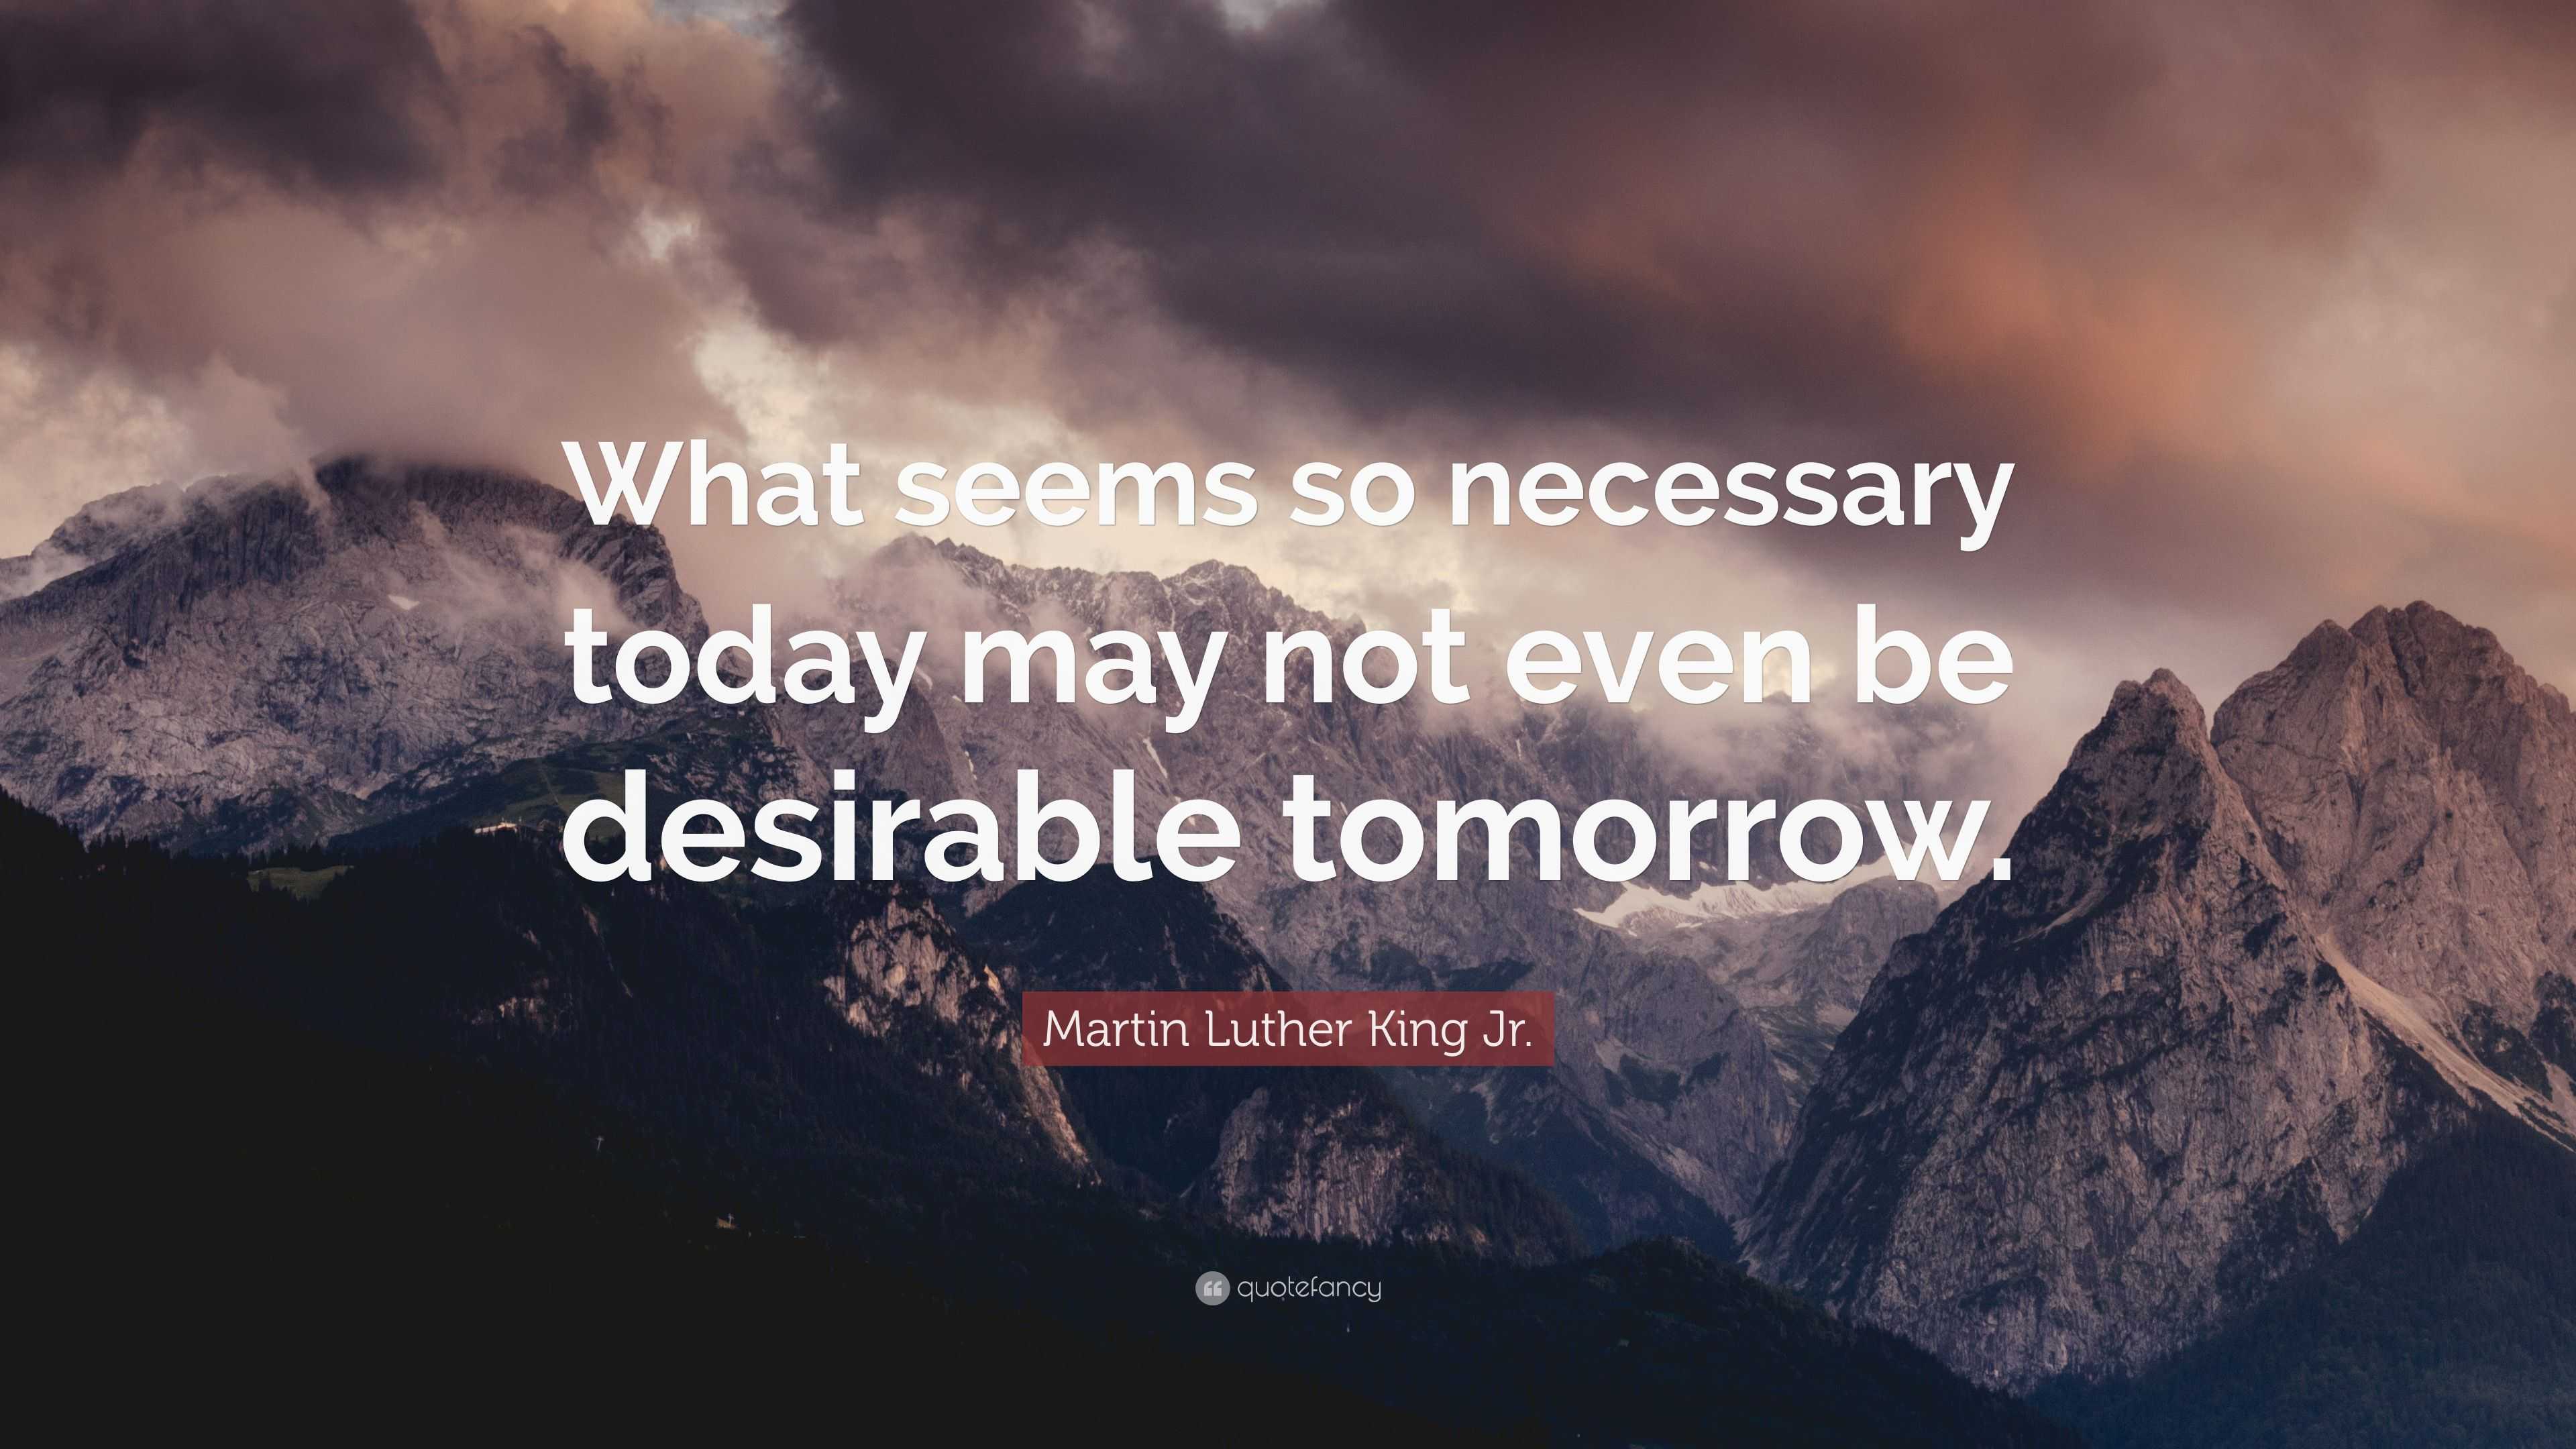 Martin Luther King Jr. Quote: “What seems so necessary today may not ...